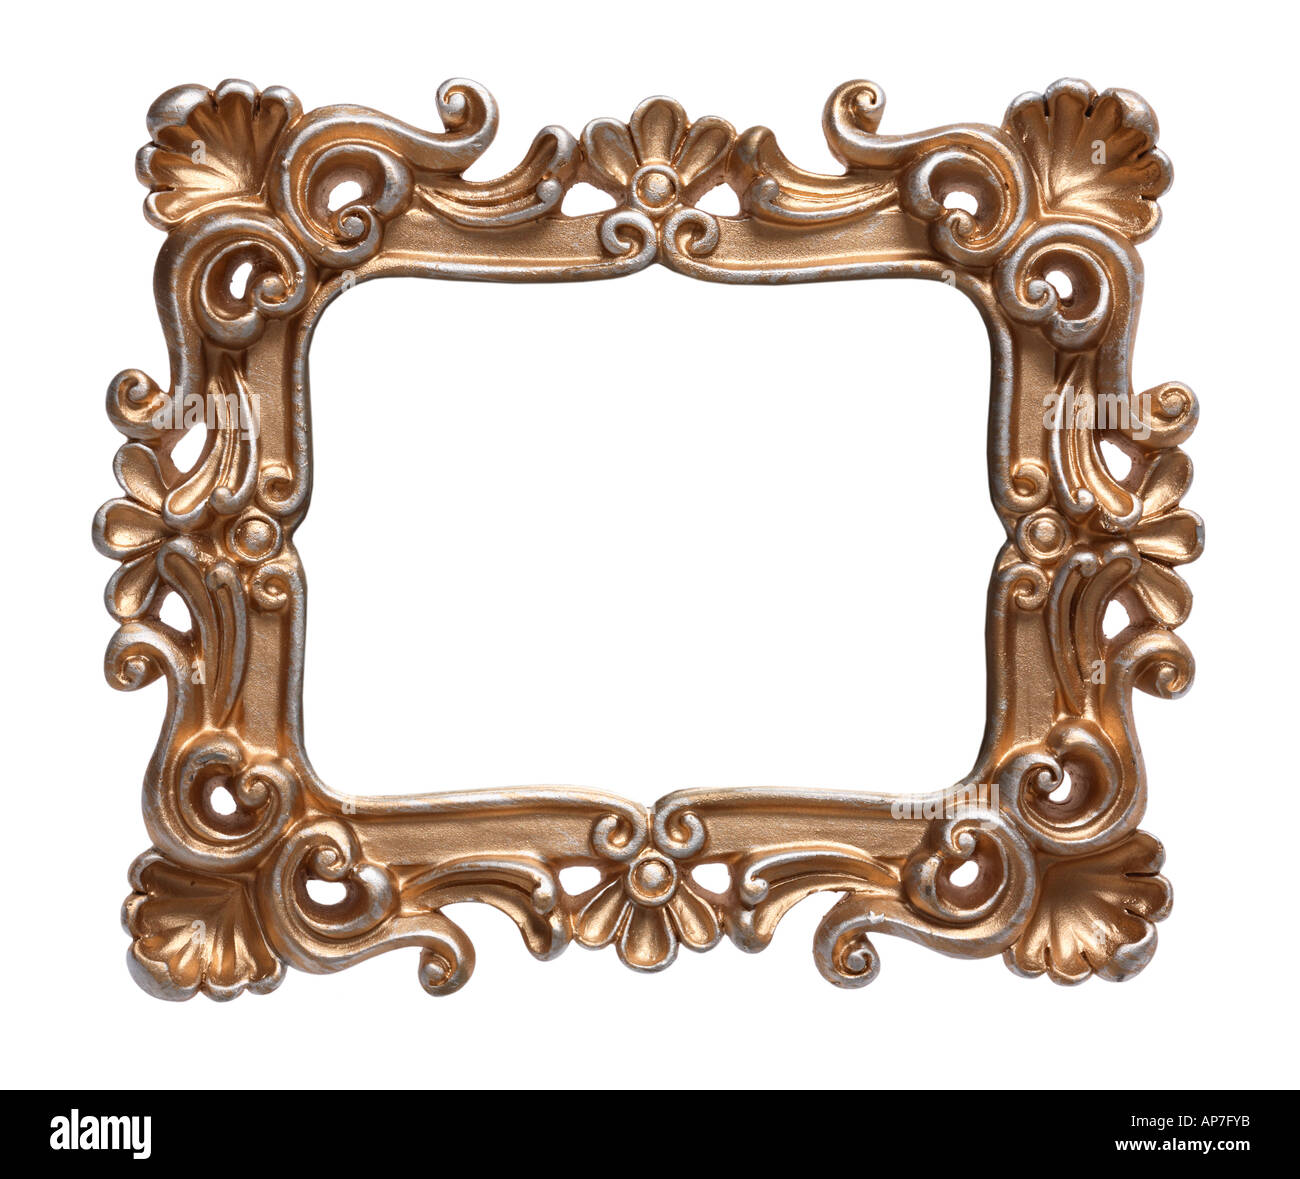 Ornate Picture Frame Stock Photo